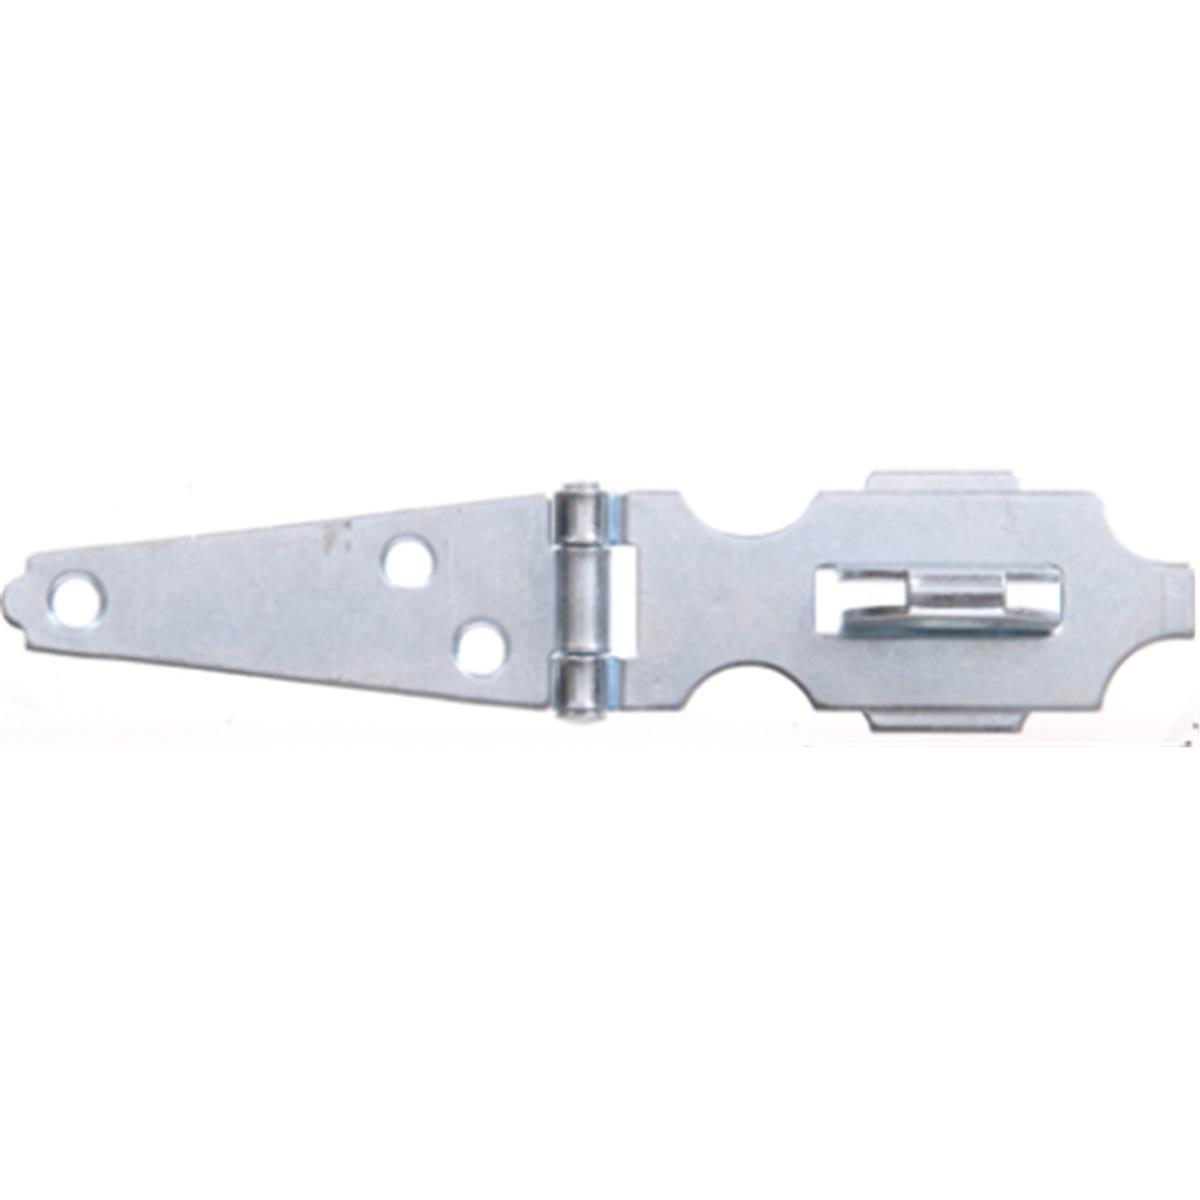 3 In. Zinc Plated Hinge Hasp